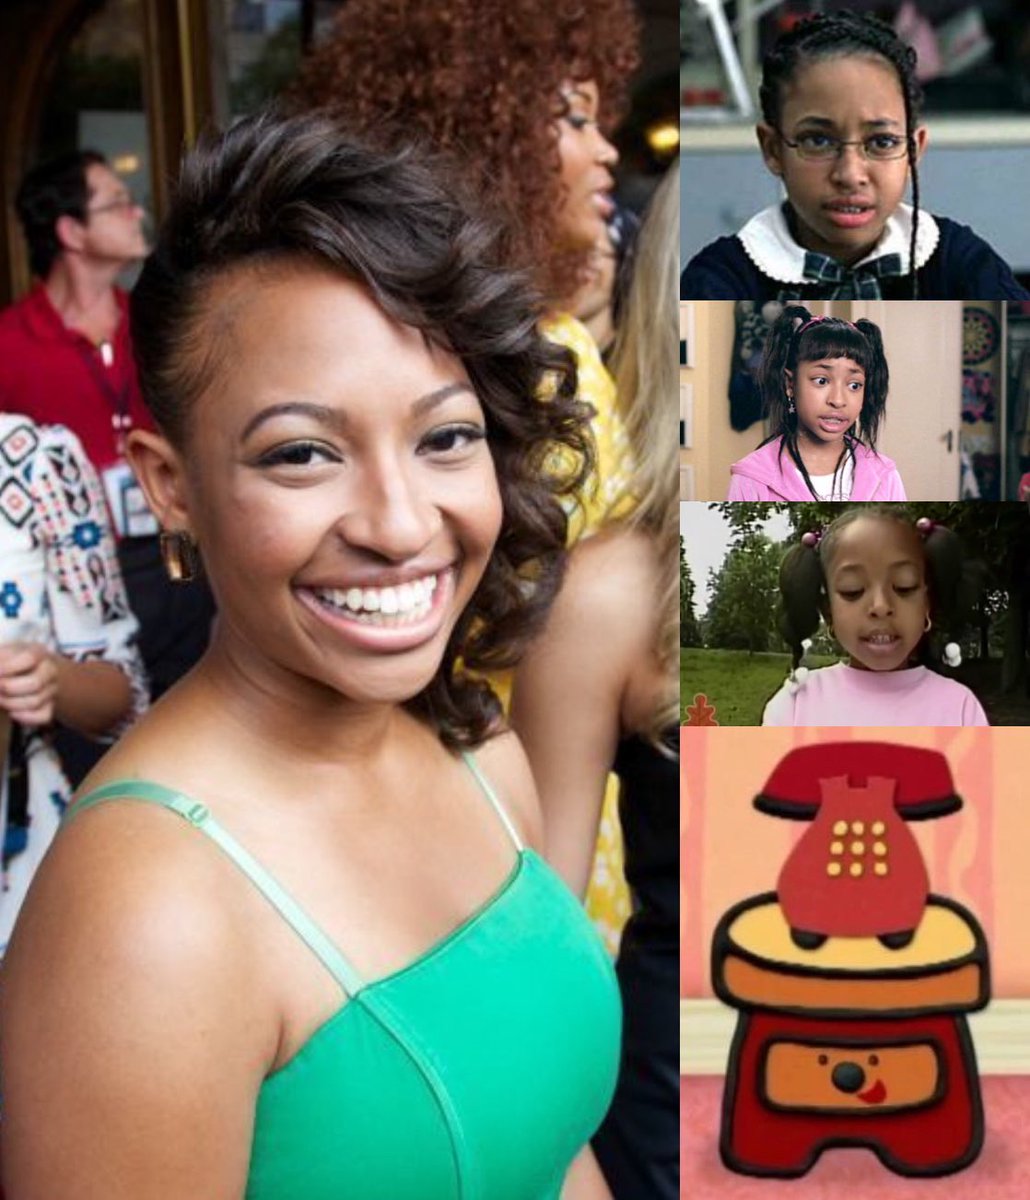 Happy 33rd birthday to Aleisha Allen! The actress who played Alicia in School of Rock, Lindsey in Are We There Yet? and Are We Done Yet?, appeared in a video letter segment from the Blue’s Clues episode, Adventures in Art and voiced Sidetable Drawer on Blue's Clues. #AleishaAllen